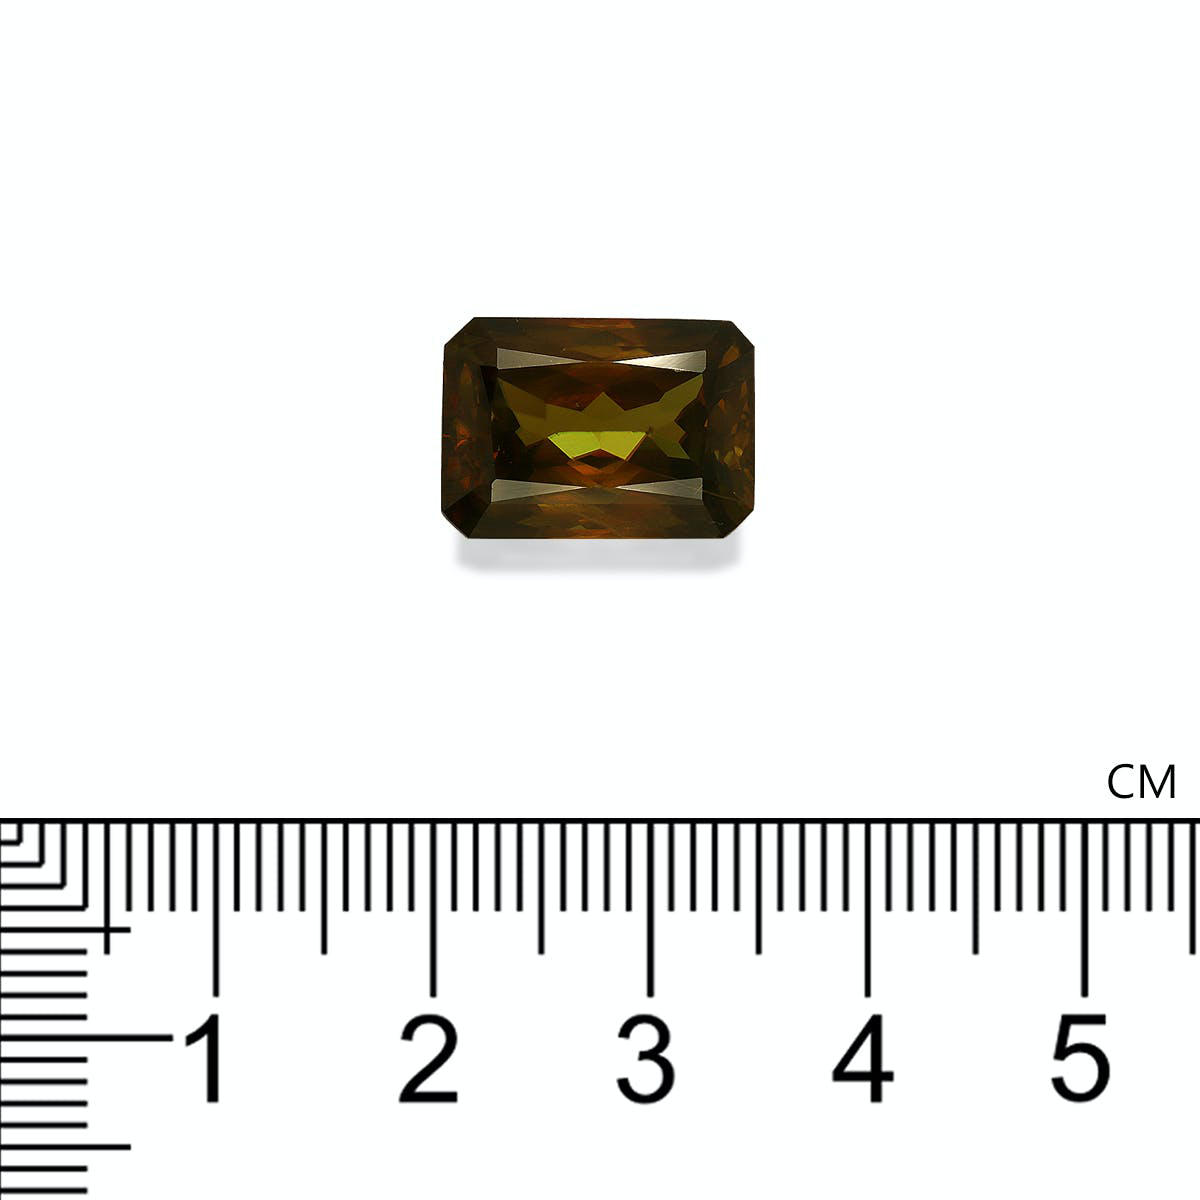 Picture of Brown Sphene 10.00ct (SH0174)